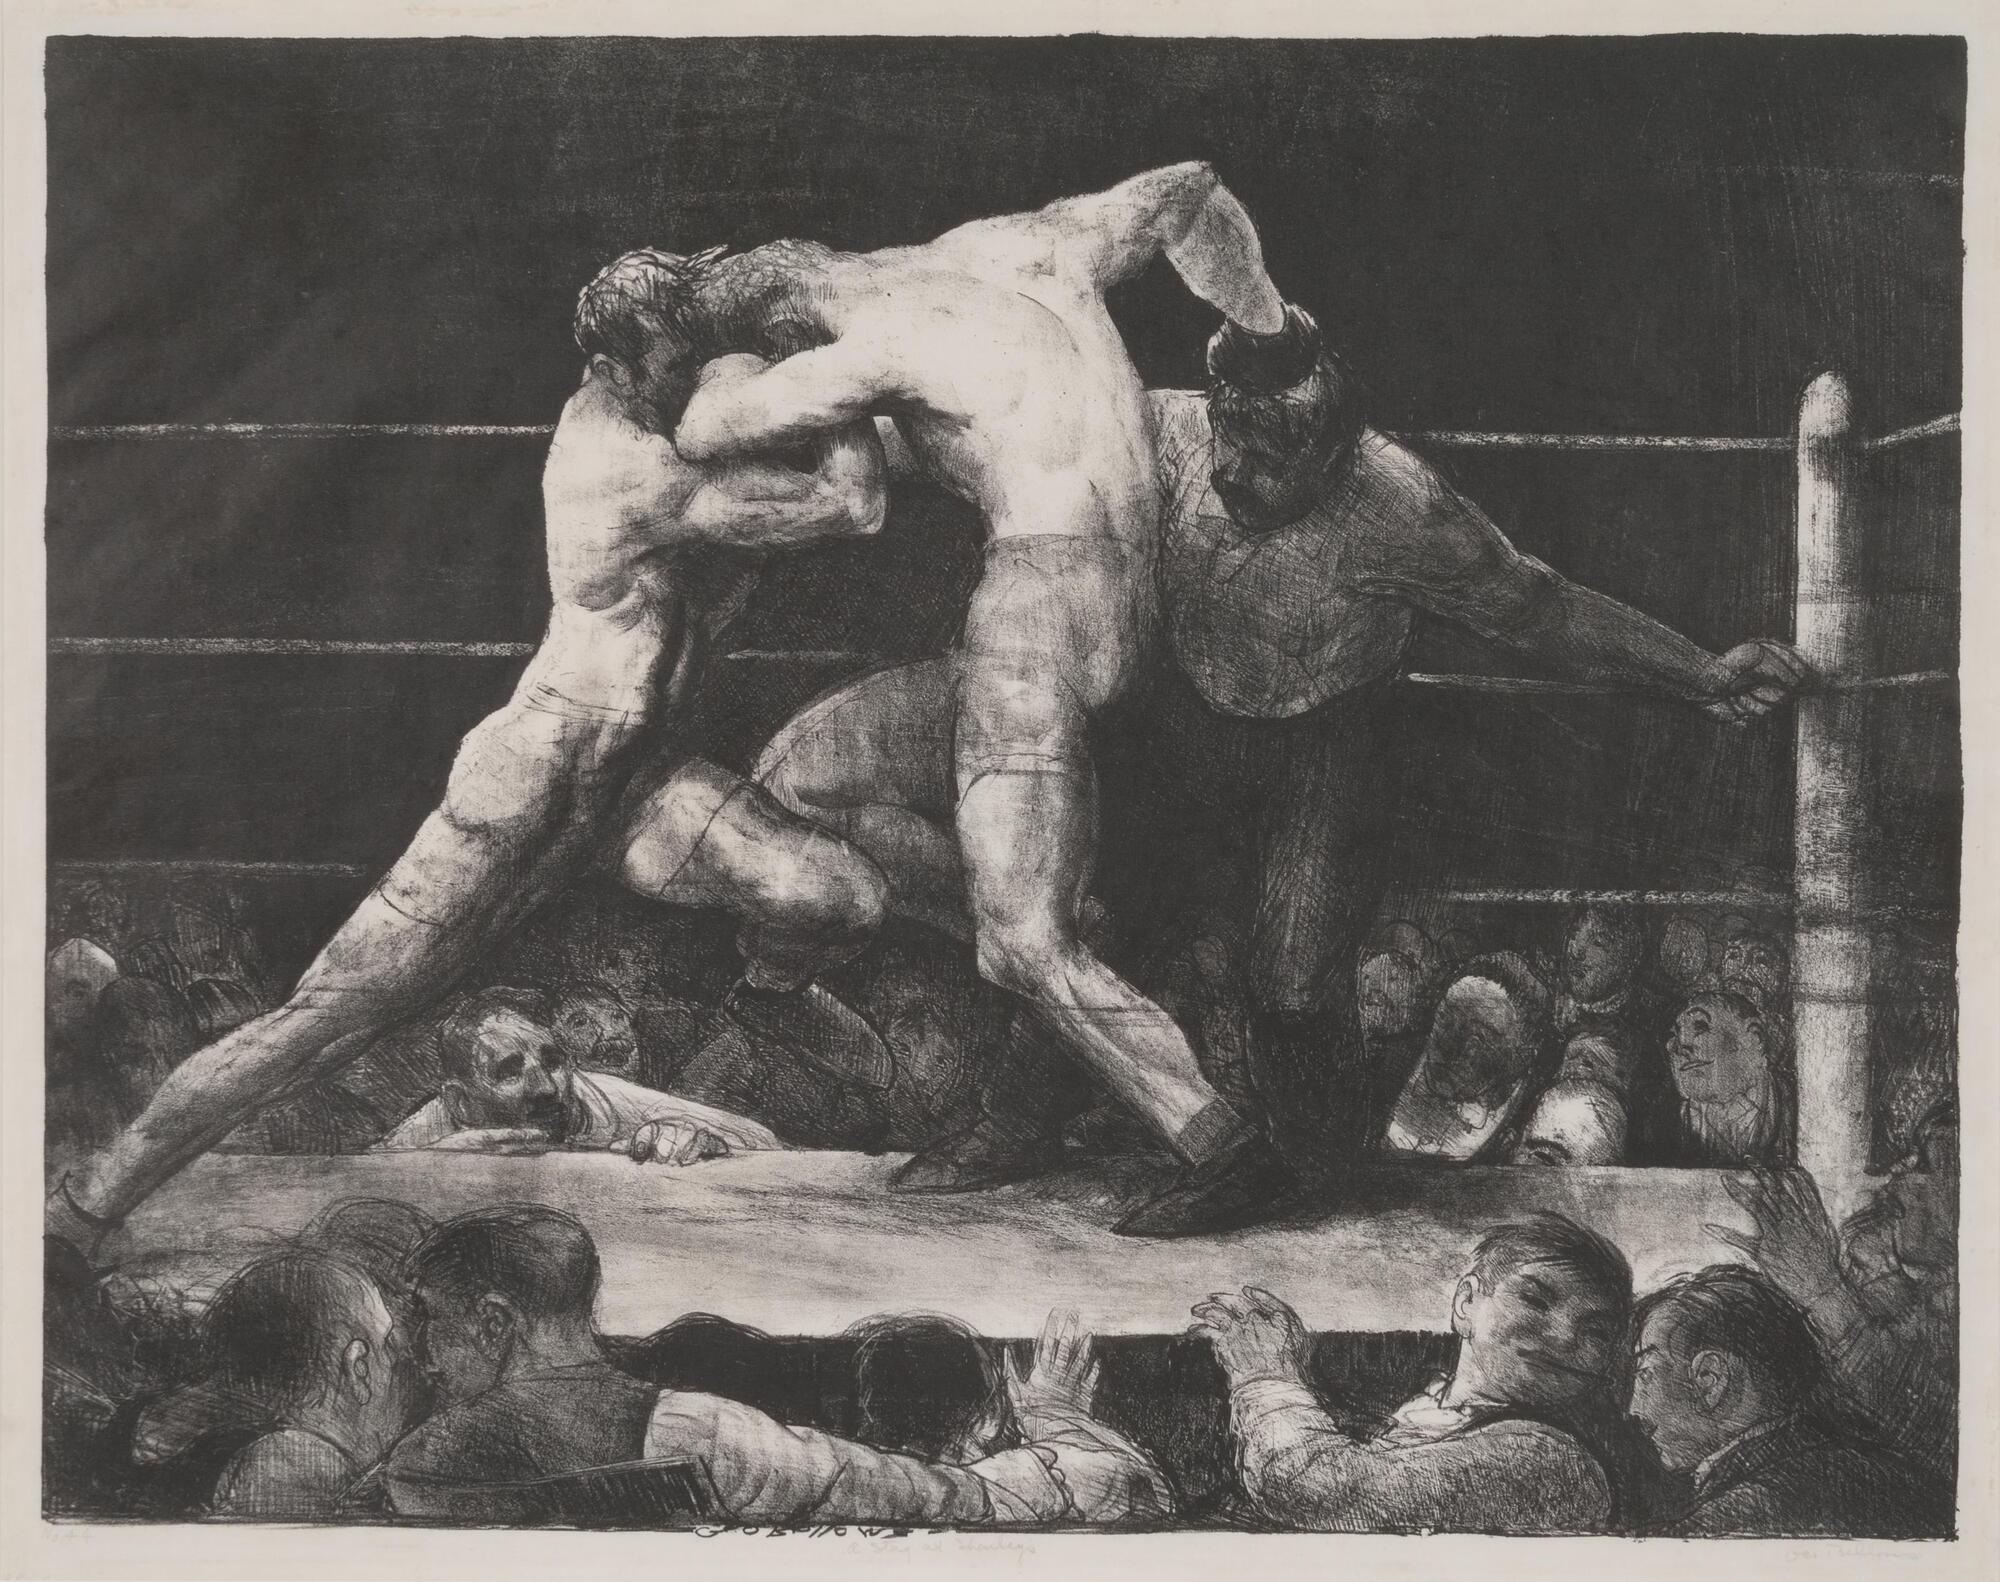 Two boxers trade punches in a ring with the referee close behind and the crowd cheering. One boxer is pushing the other with his forearm.